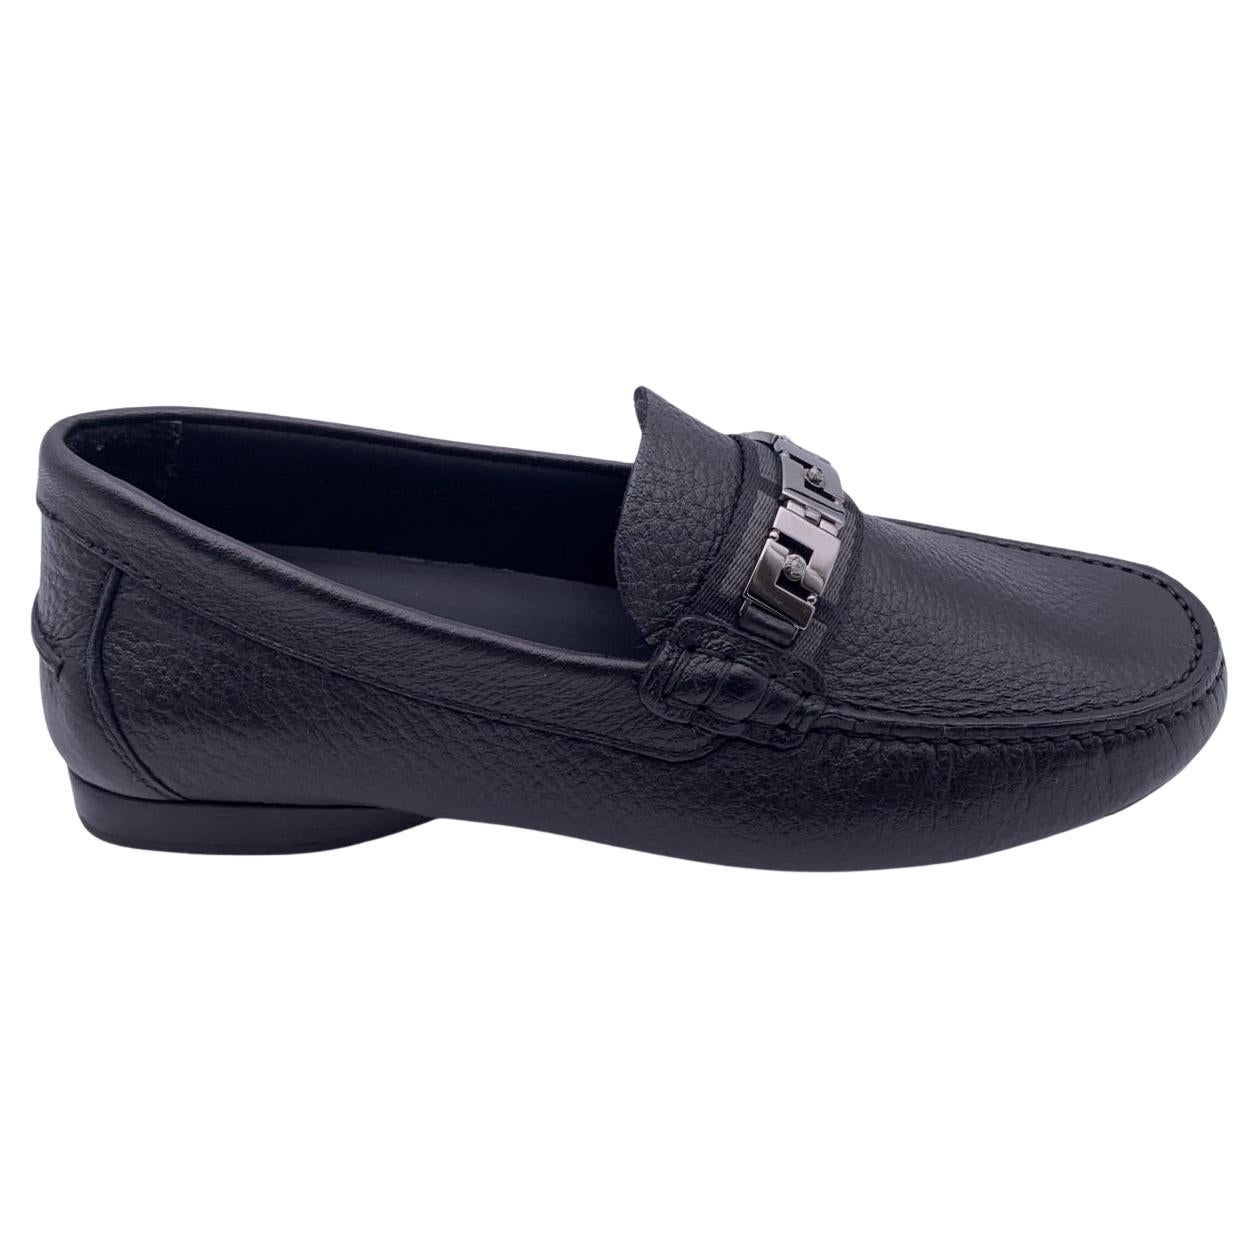 Versace Black Leather Mocassins Loafers Car Shoes Size 38.5 For Sale